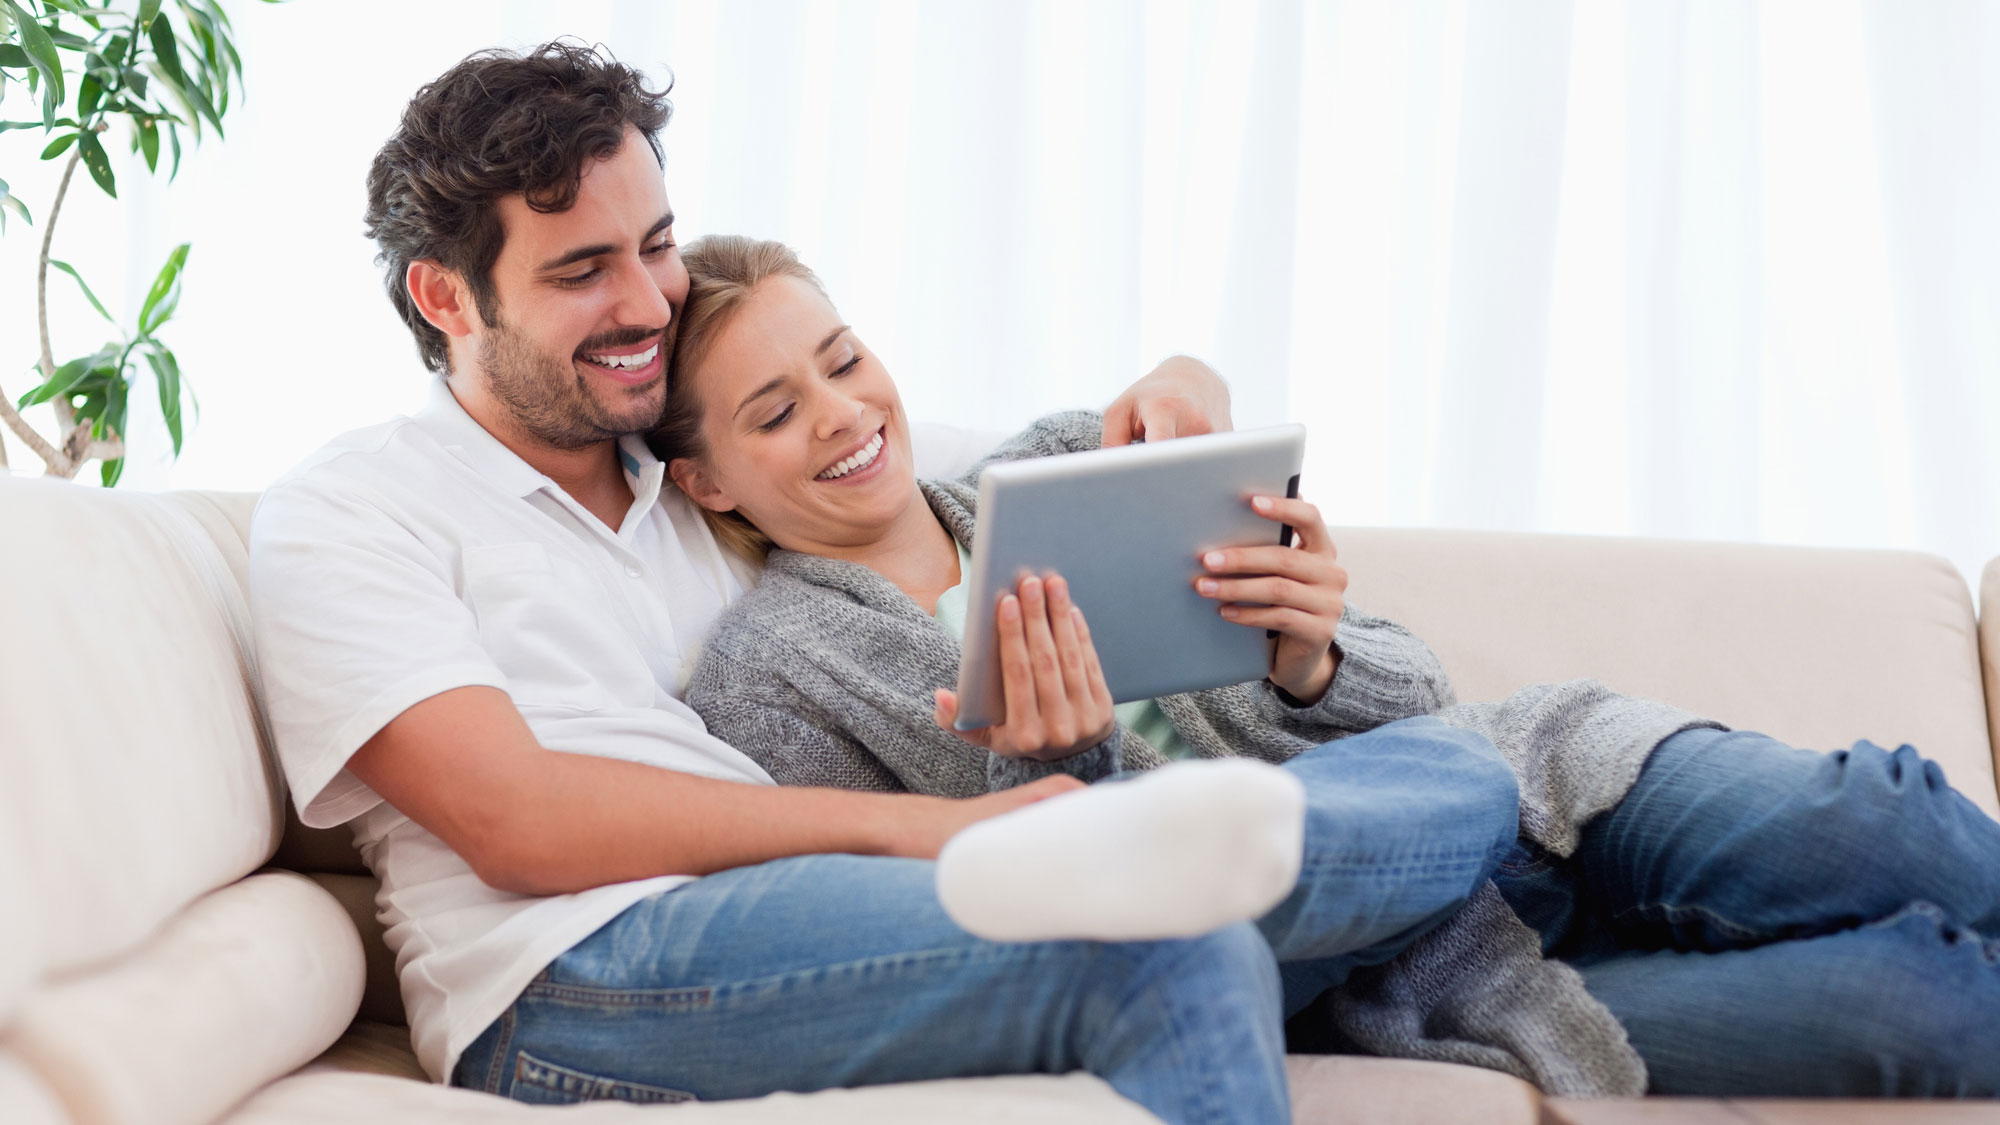 Couple sitting together on couch looking at laptop